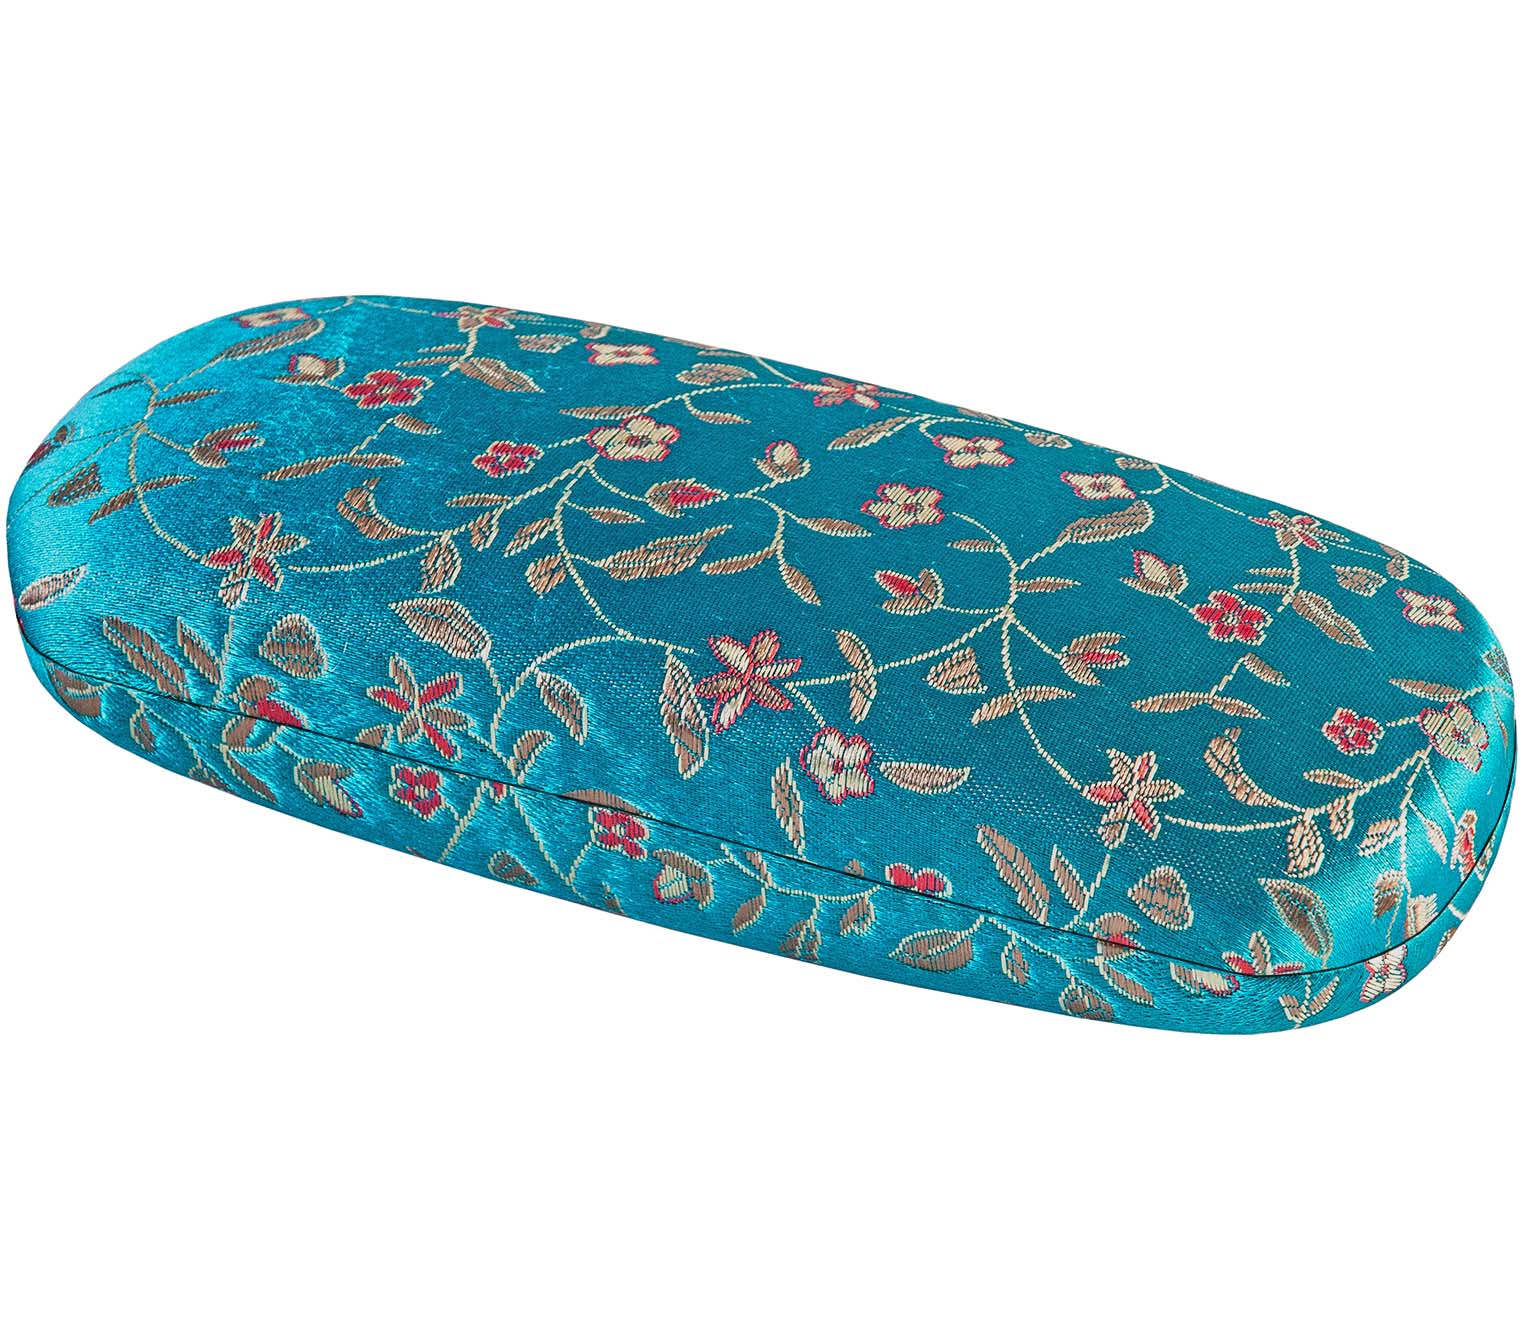 Main Image (Angle) - Diva (Turquoise) Glasses Cases Accessories